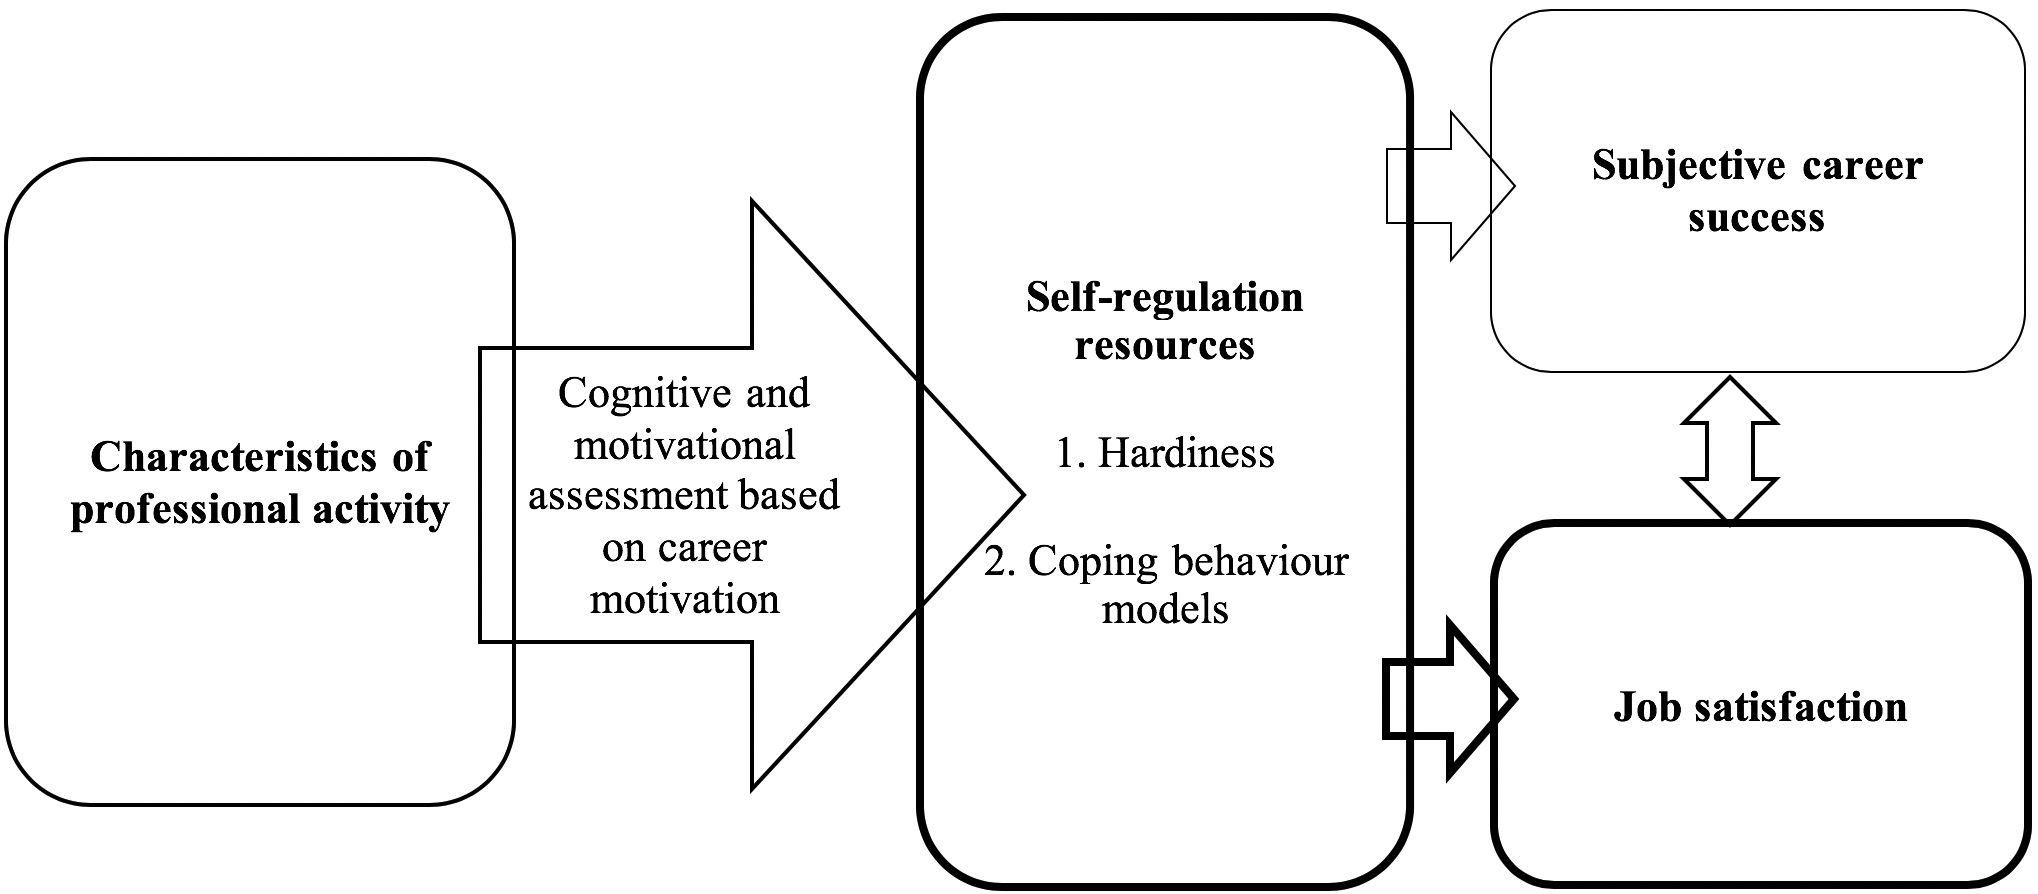 The scheme of analysis of correlations between psychological self-regulation resources with professionals’ job satisfaction and subjective assessment of career success under tense working conditions 